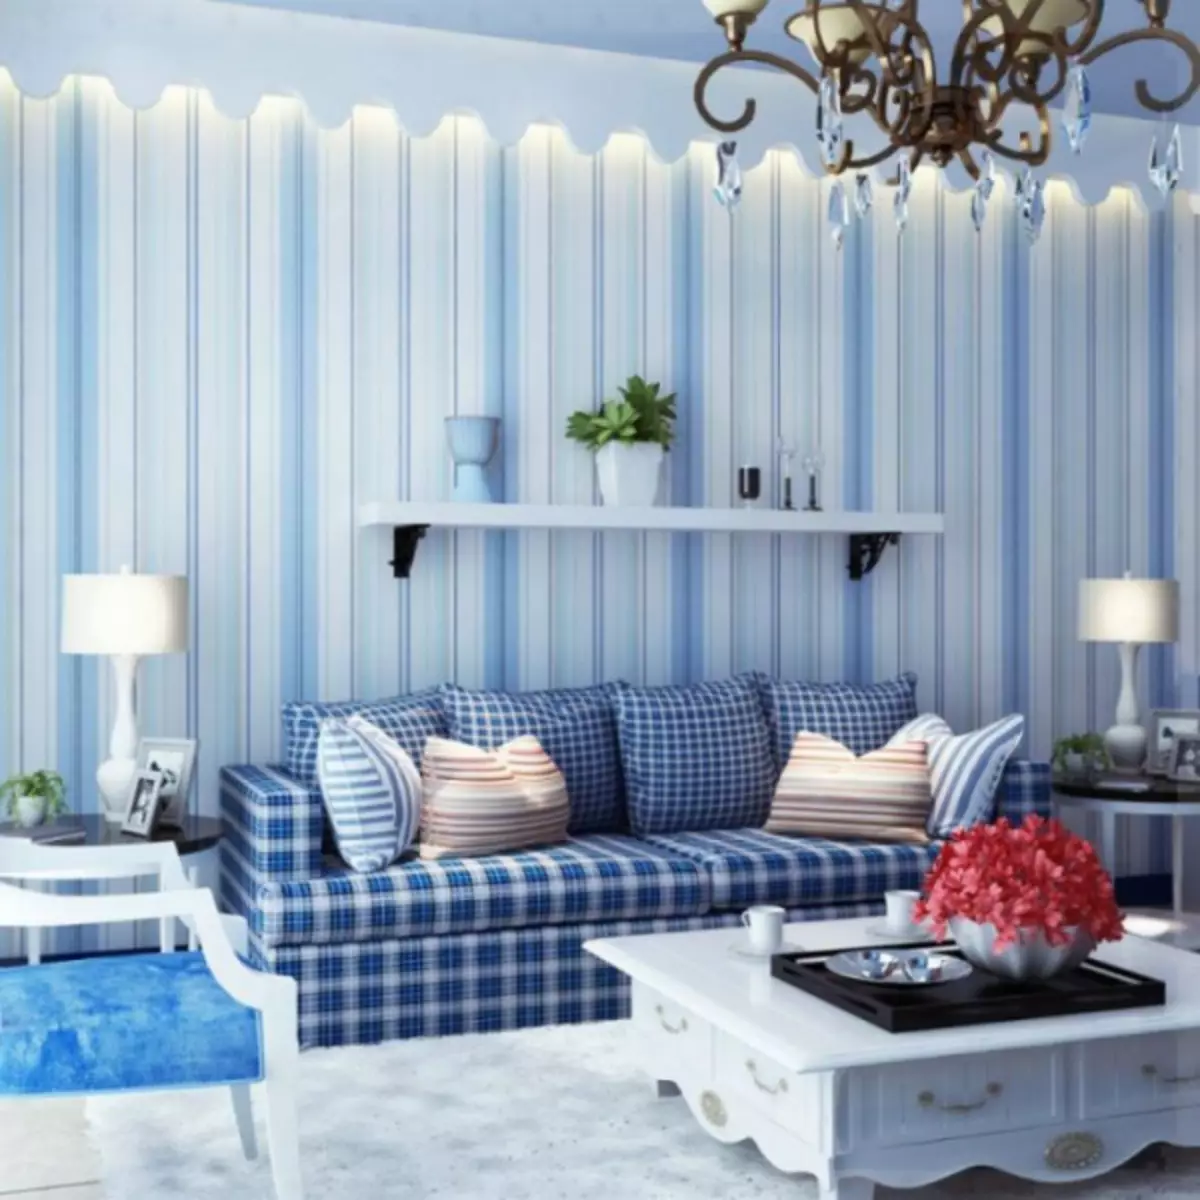 Blue living room - 110 photos of an unusual combination of blue shades in the living room